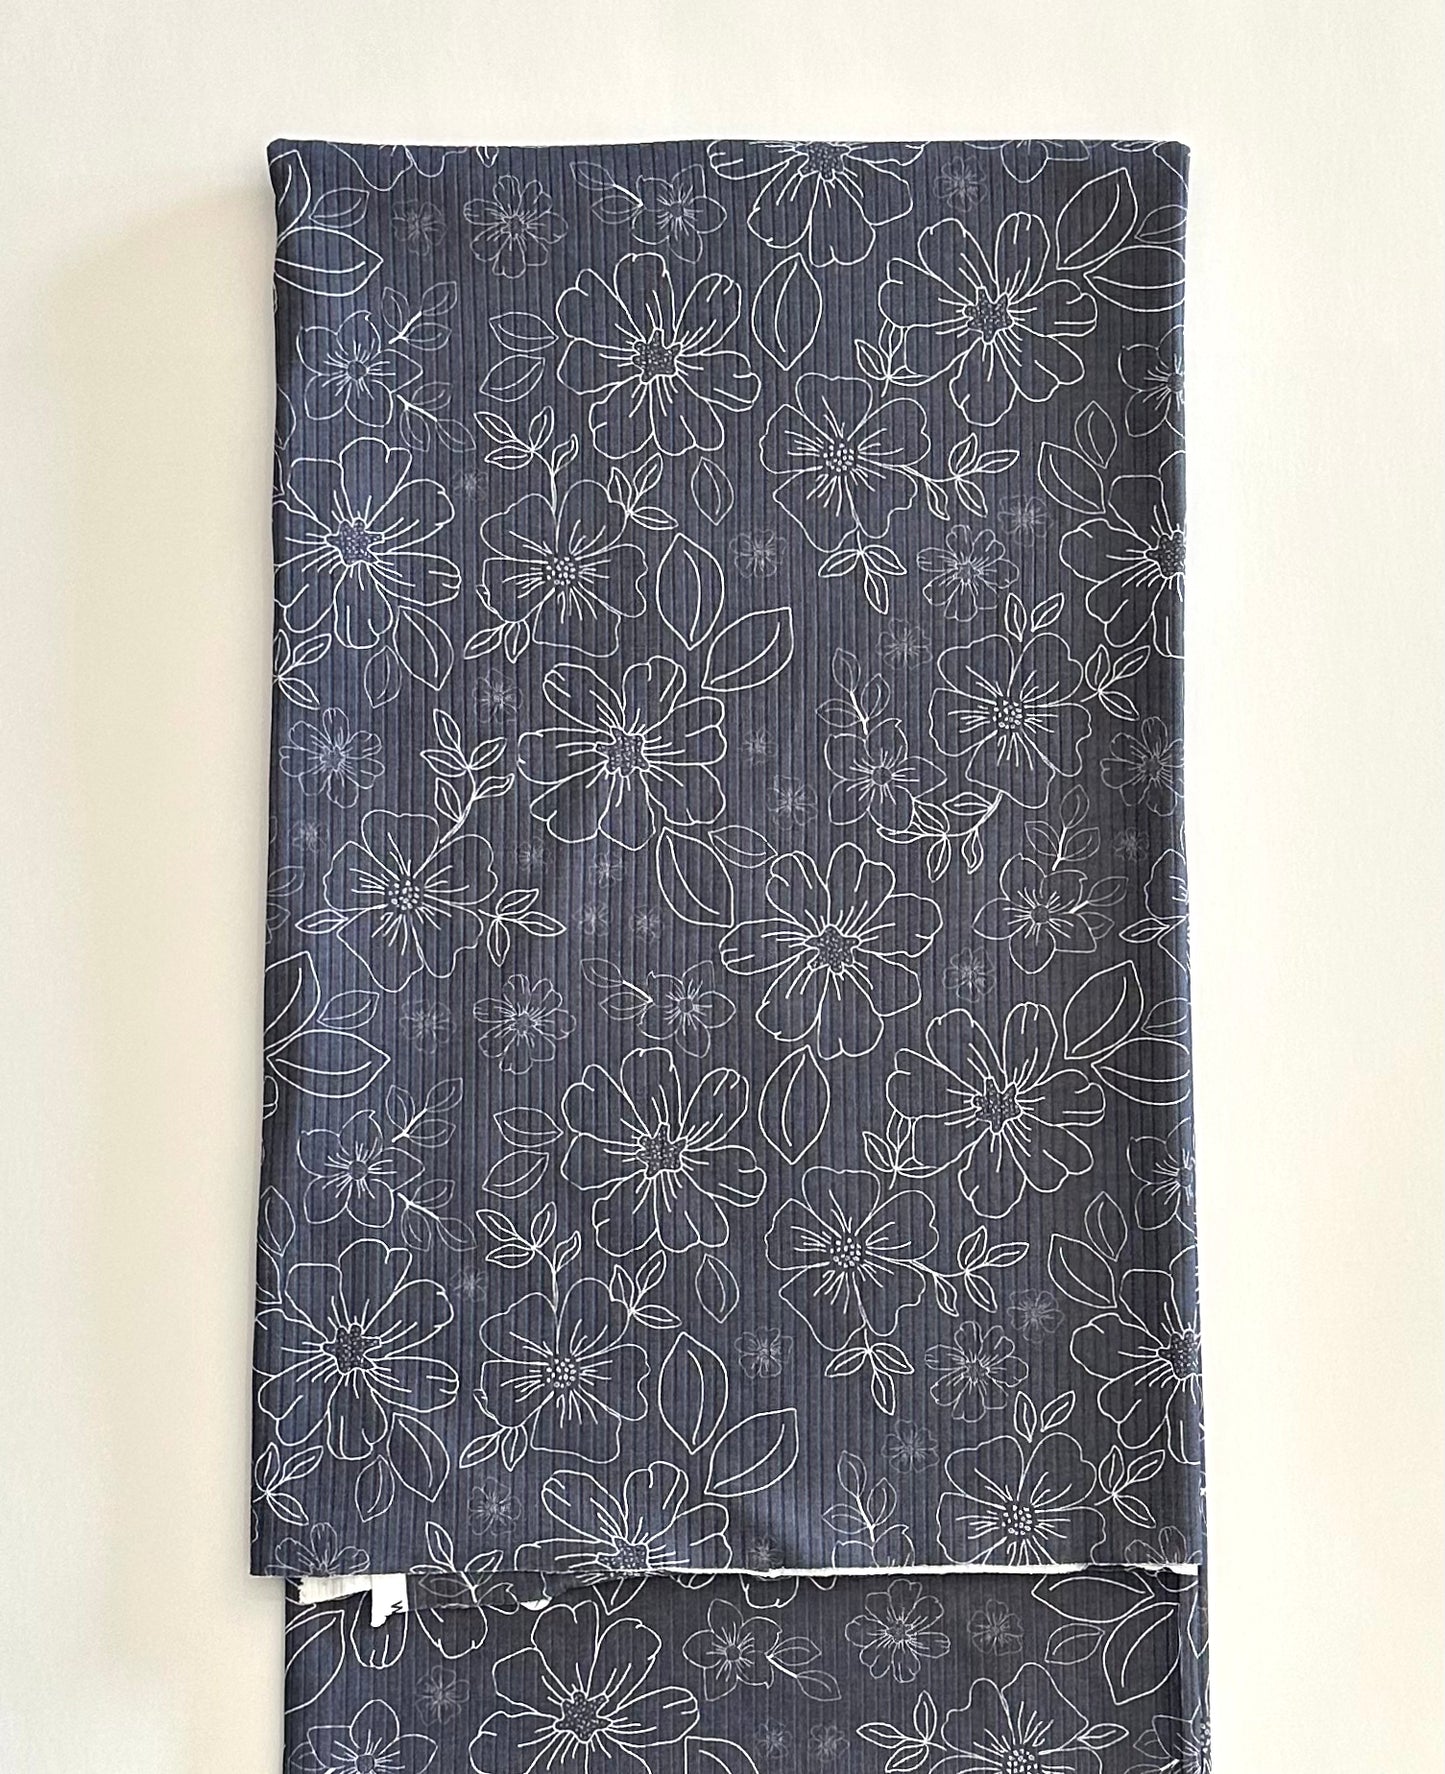 Serenity Floral Polar Night Navy in  on Unbrushed Rib Knit Fabric Sold by the 1/4 yard